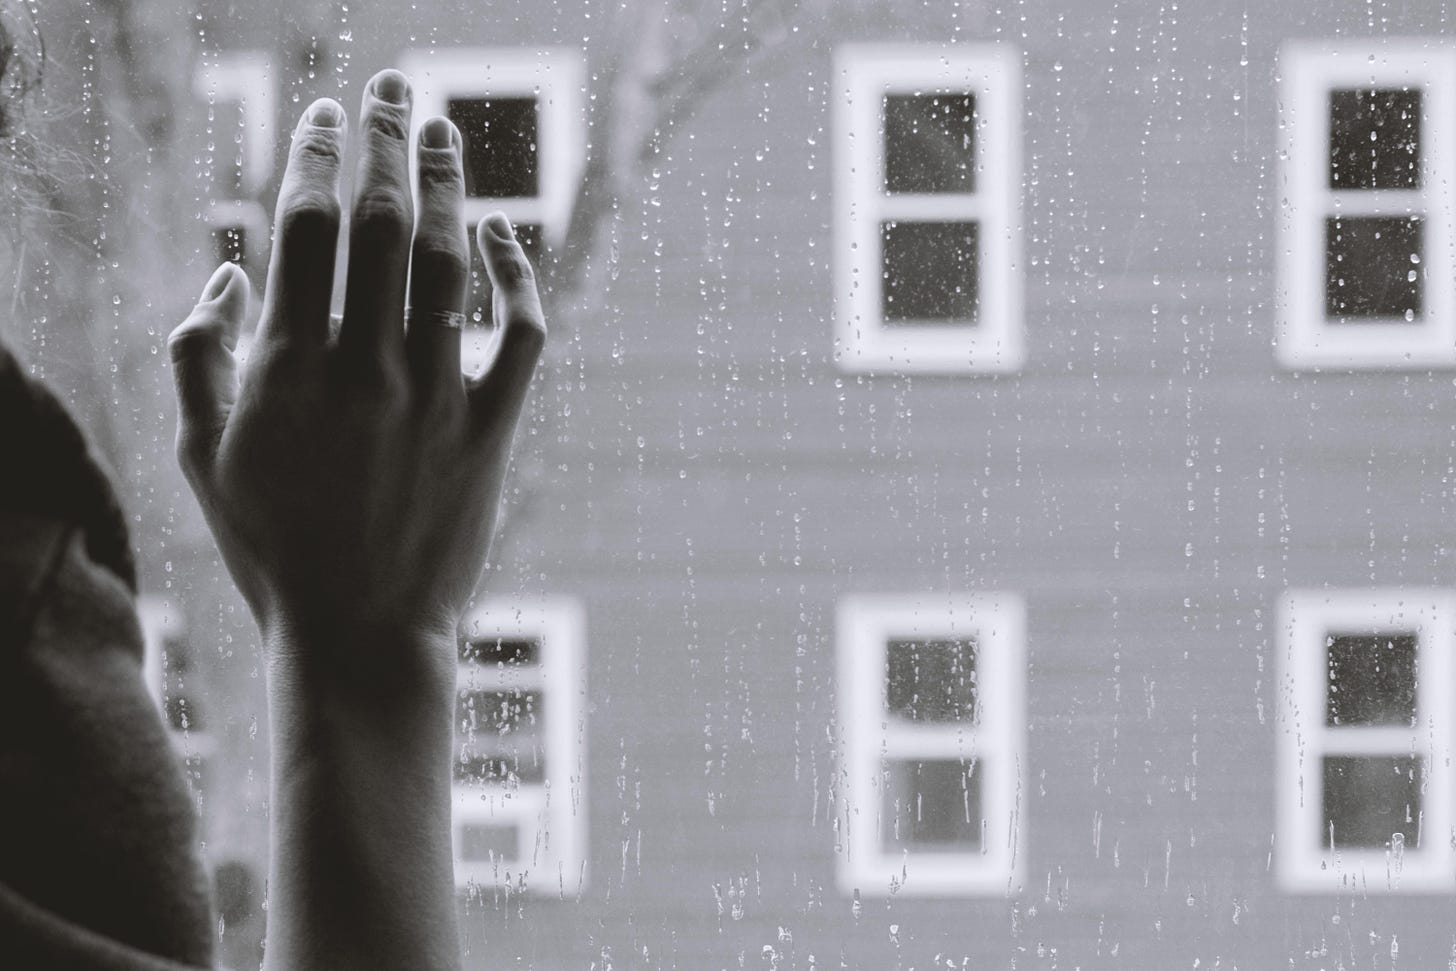 Grayscale photo of a hand raised against a window pane with droplets of rain and a building with rows of windows in the background.